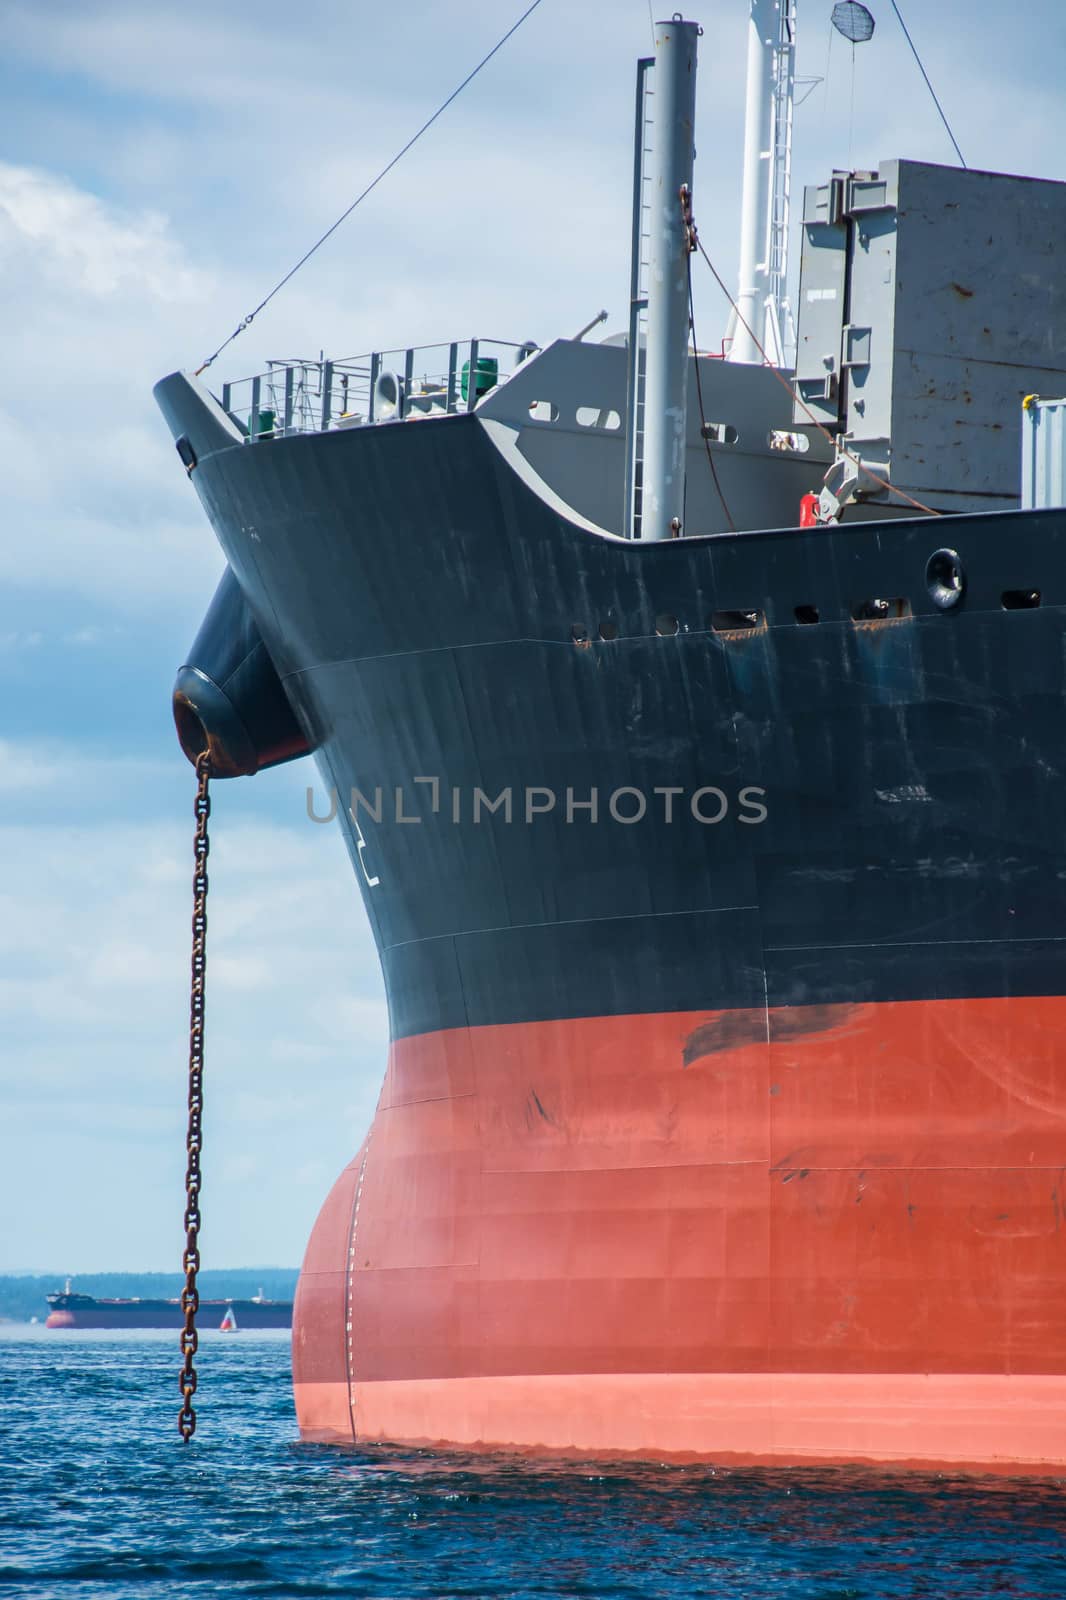 Bow of cargo ship at anchor in Seattle's Elliott Bay by cestes001